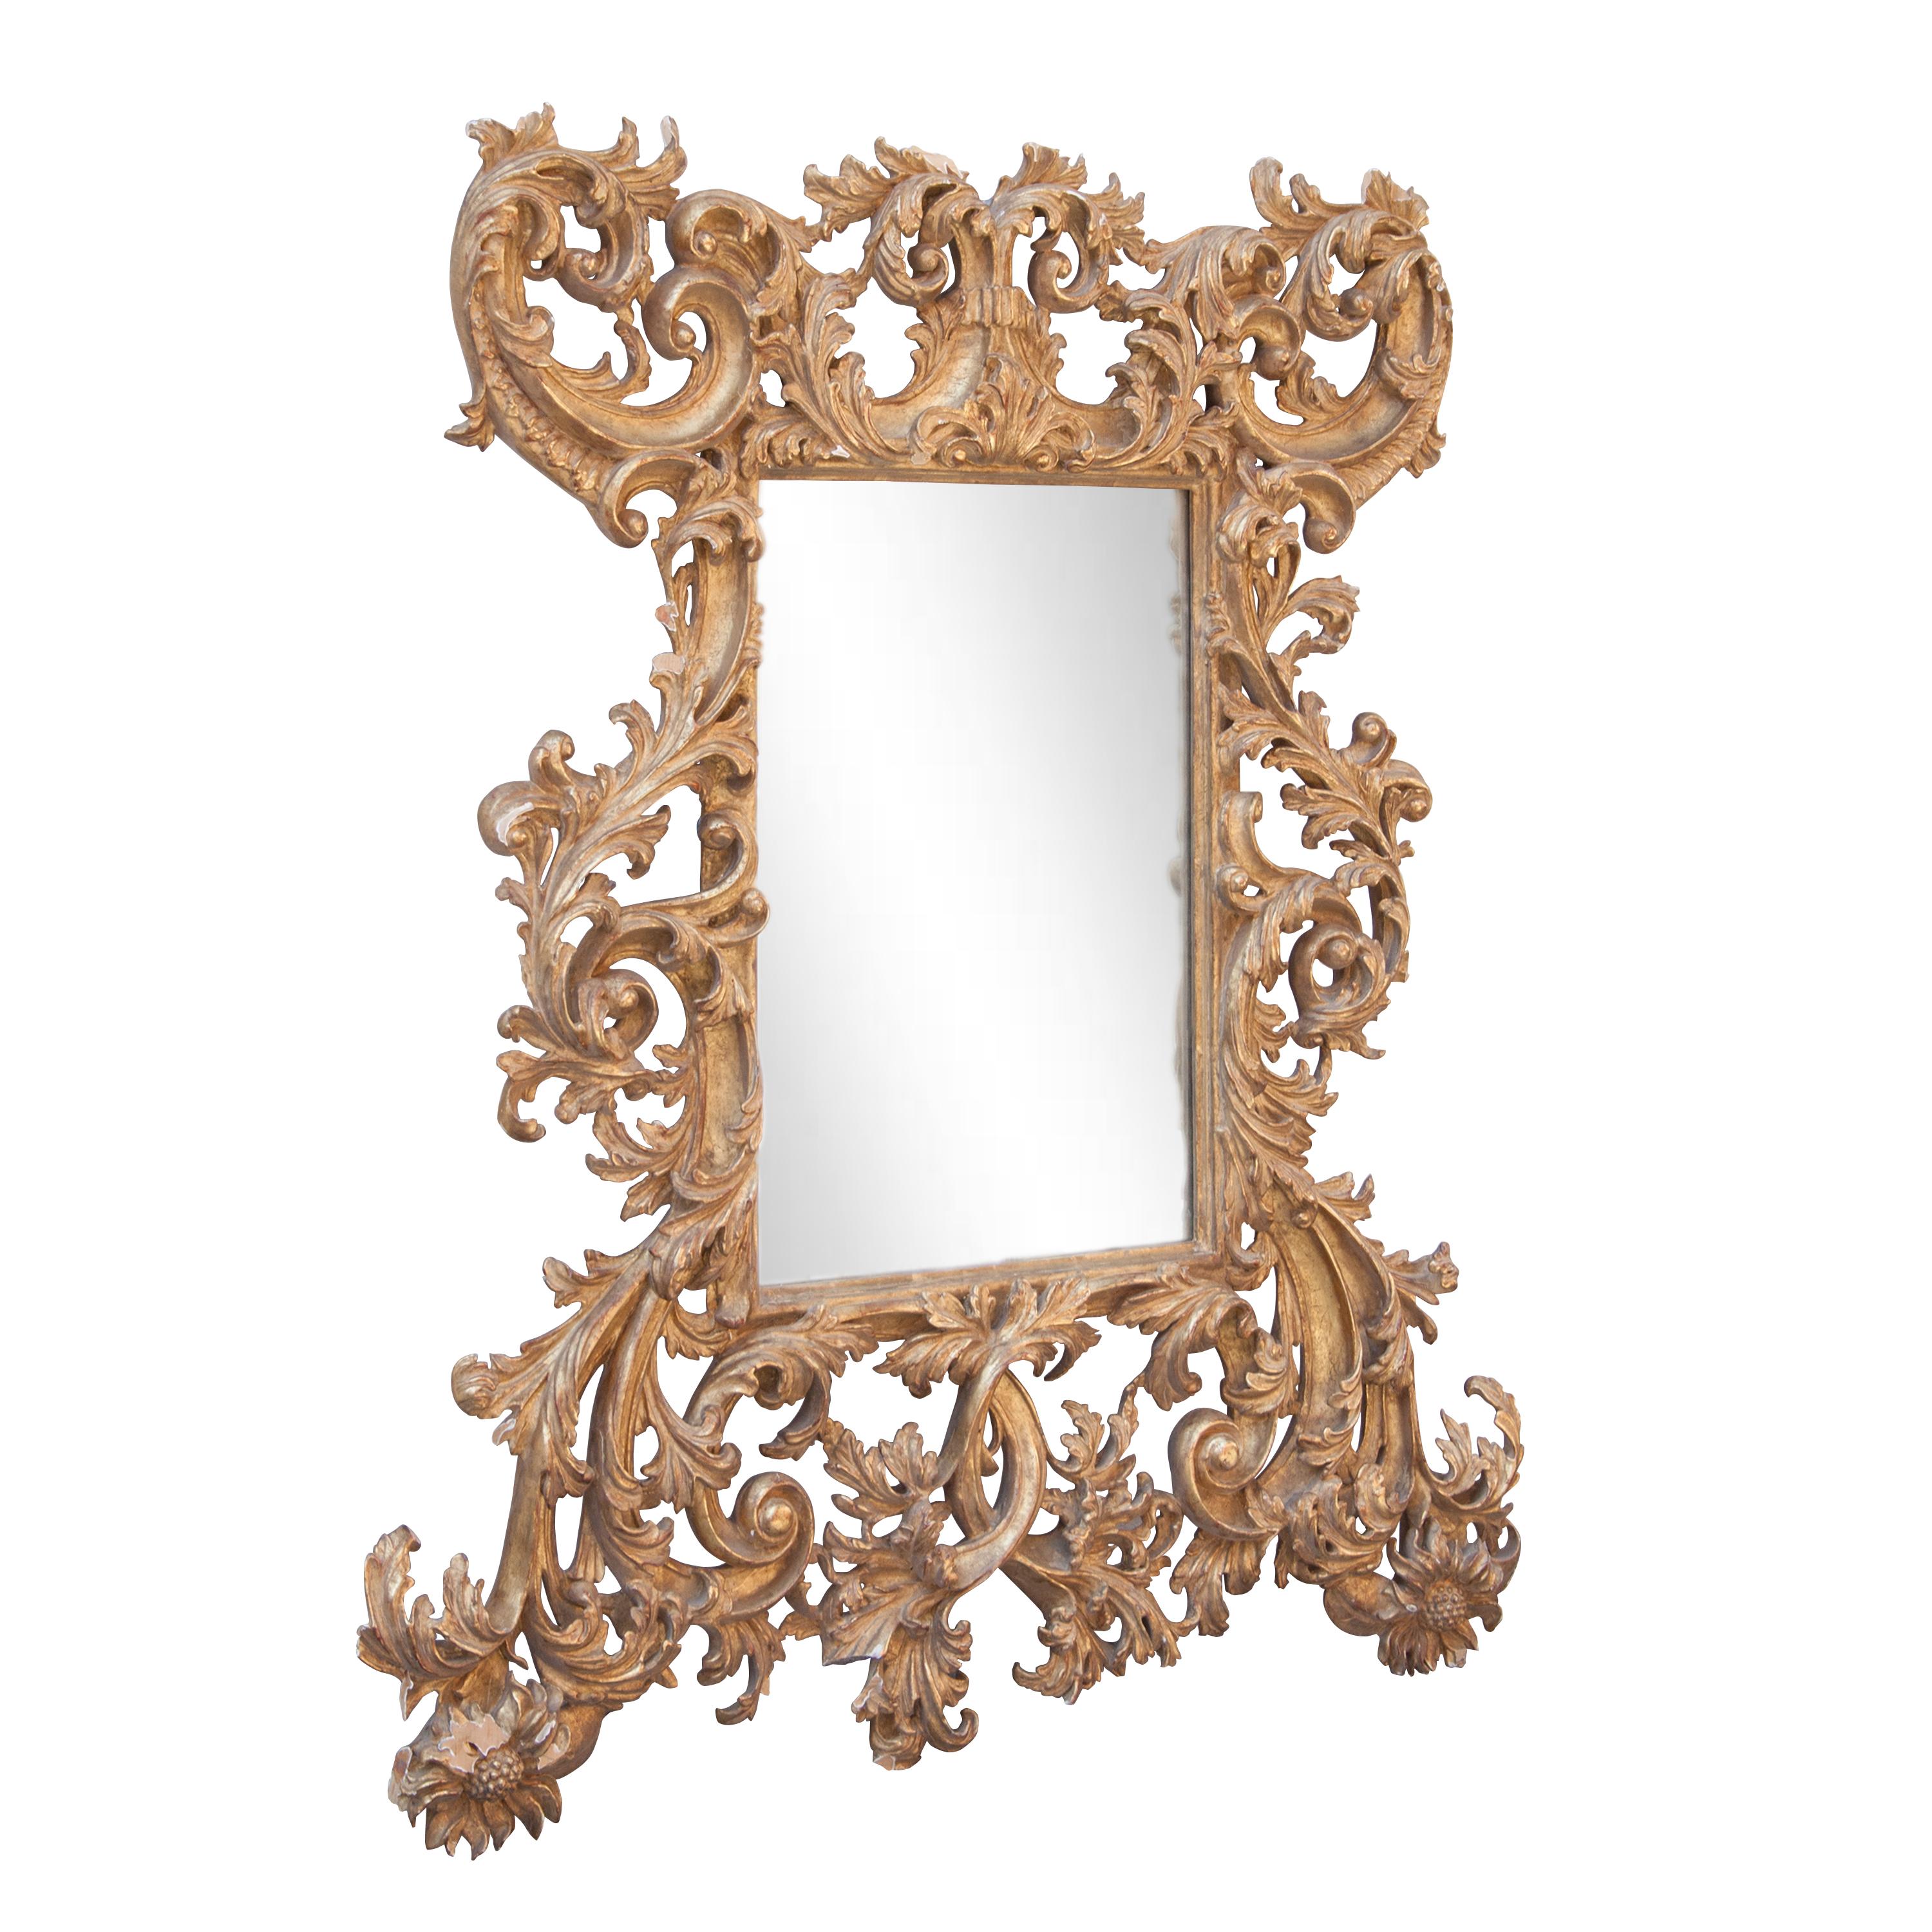 Spanish Chippendale Rectangular Handcrafted Gold Foil Wood Mirror Spain, 1970 For Sale